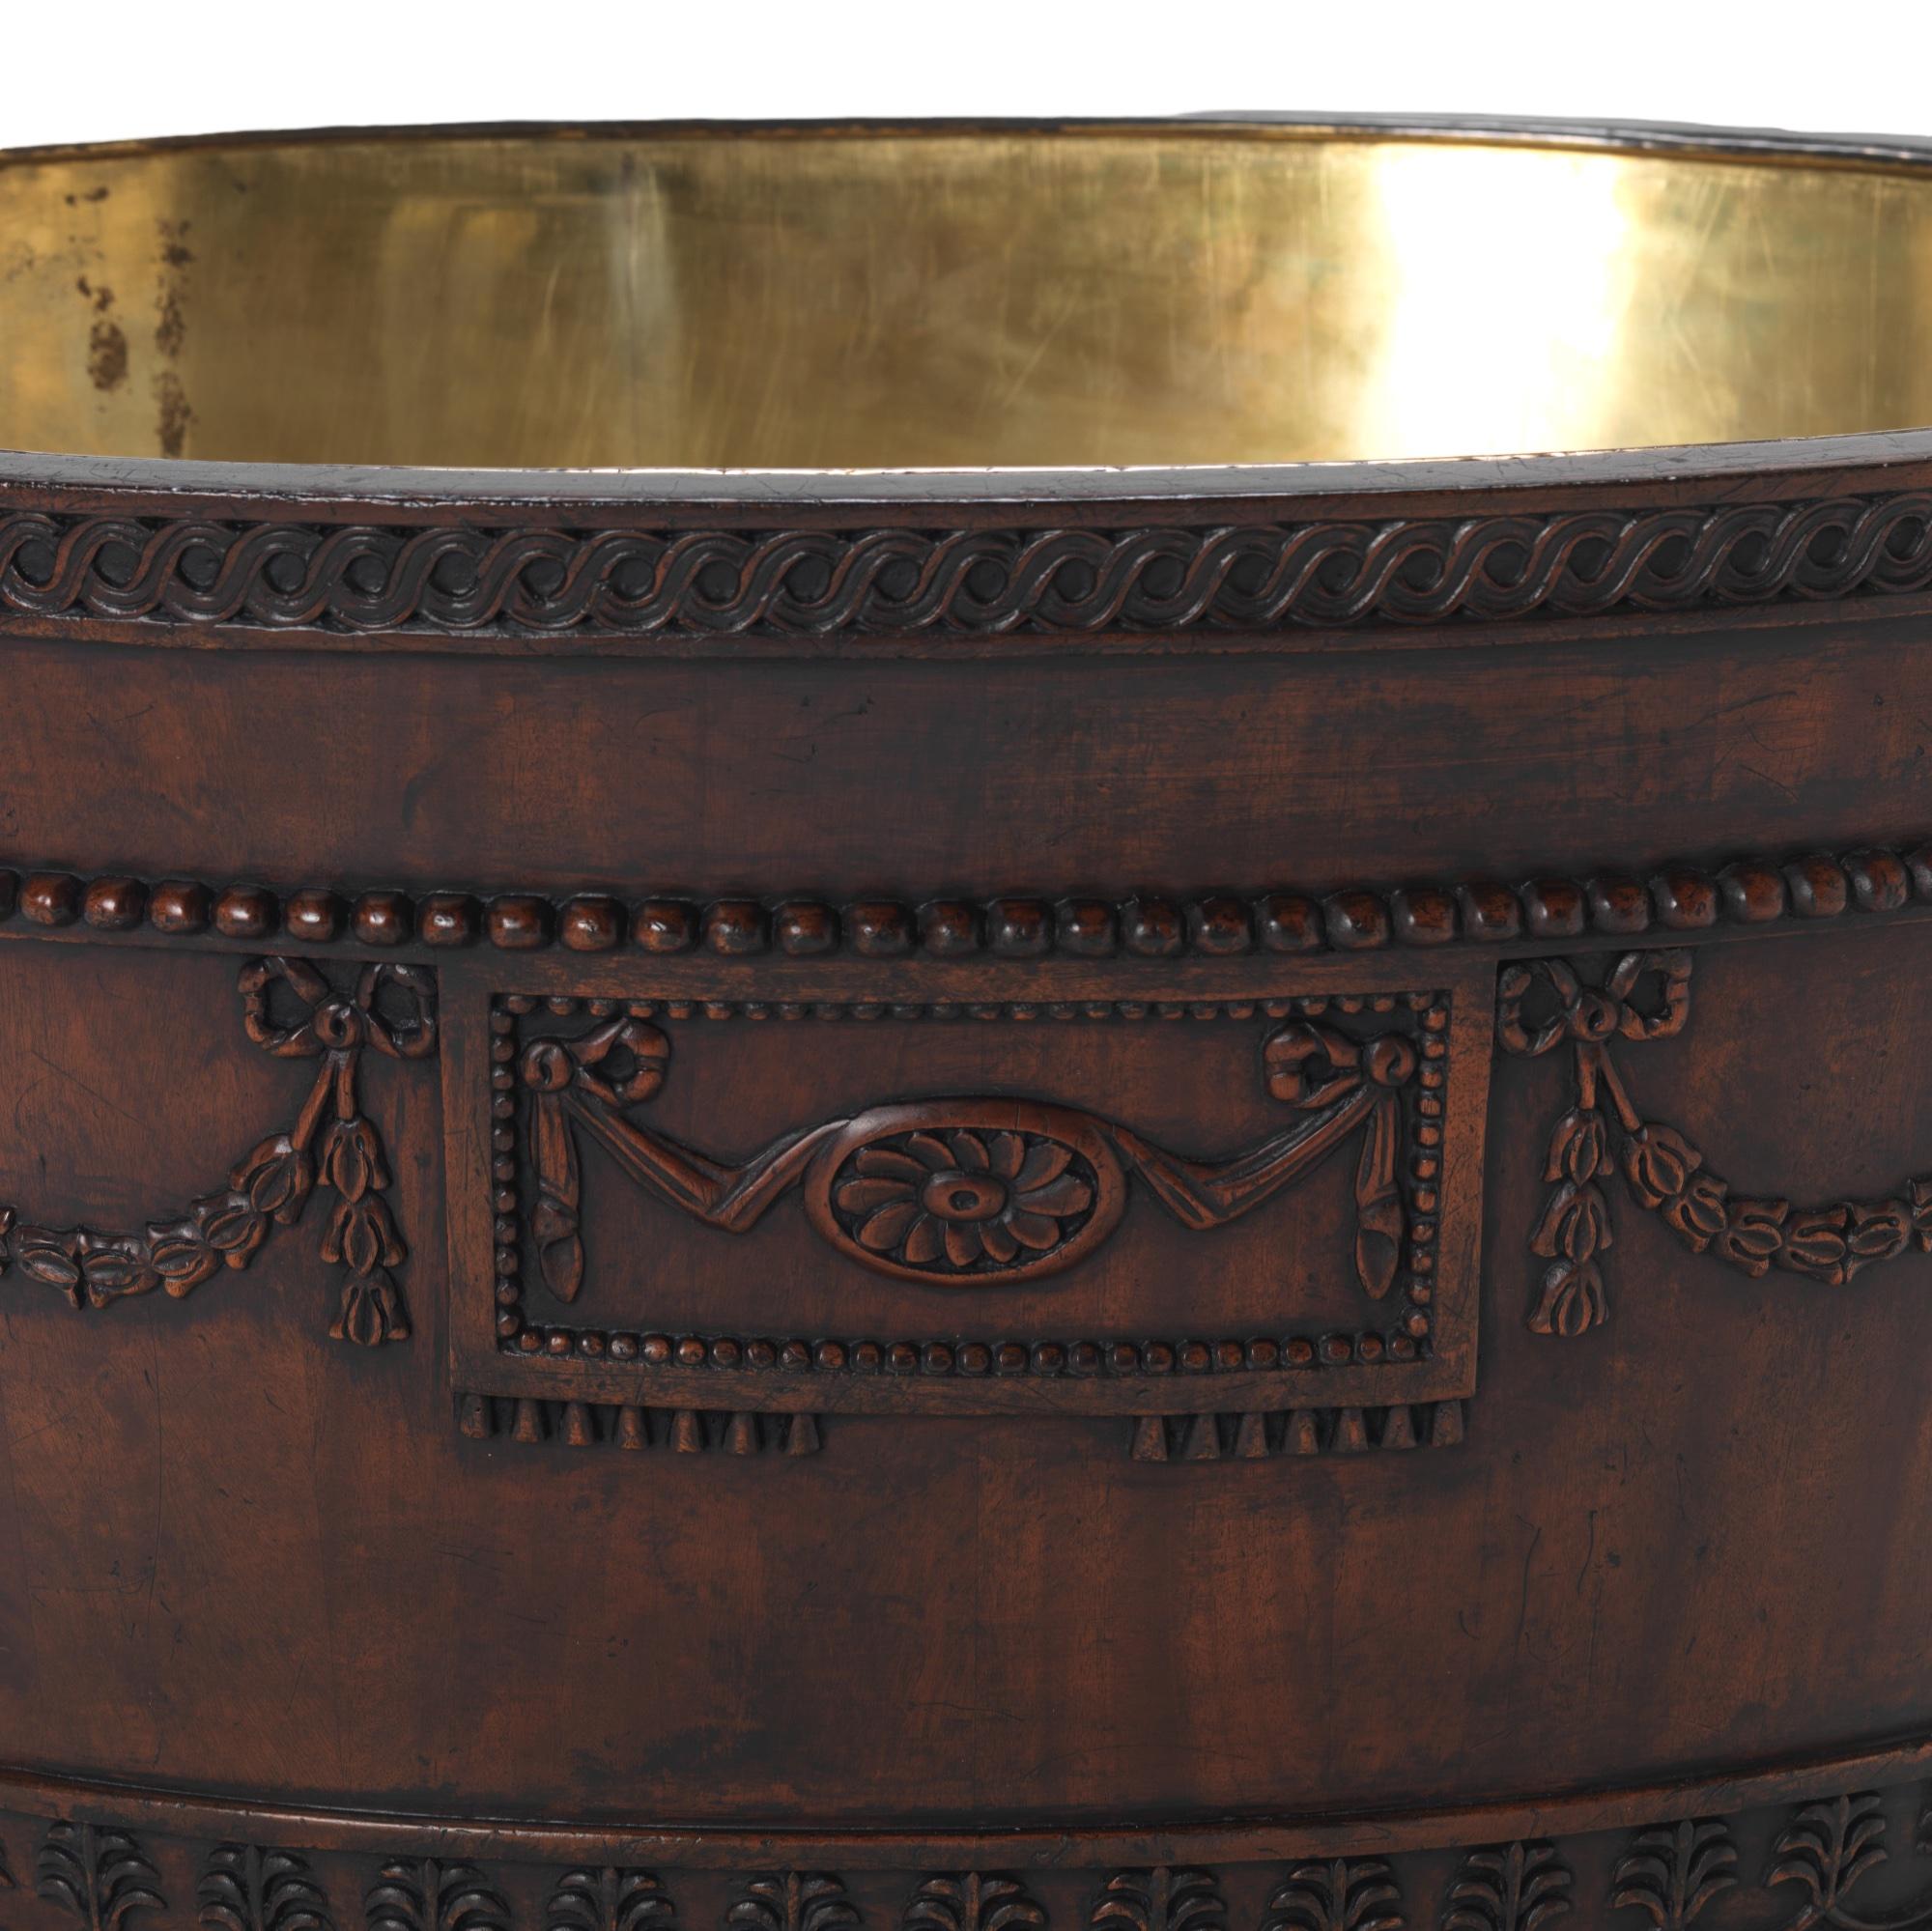 A George III design ormolu mounted mahogany oval wine cooler after a design by Robert Adam, attributed to Sefferin Nelson, circa 1772-4. The rim with carved and gilded entrelac border, the body with carved ribbon-tied trailing husk garlands centred